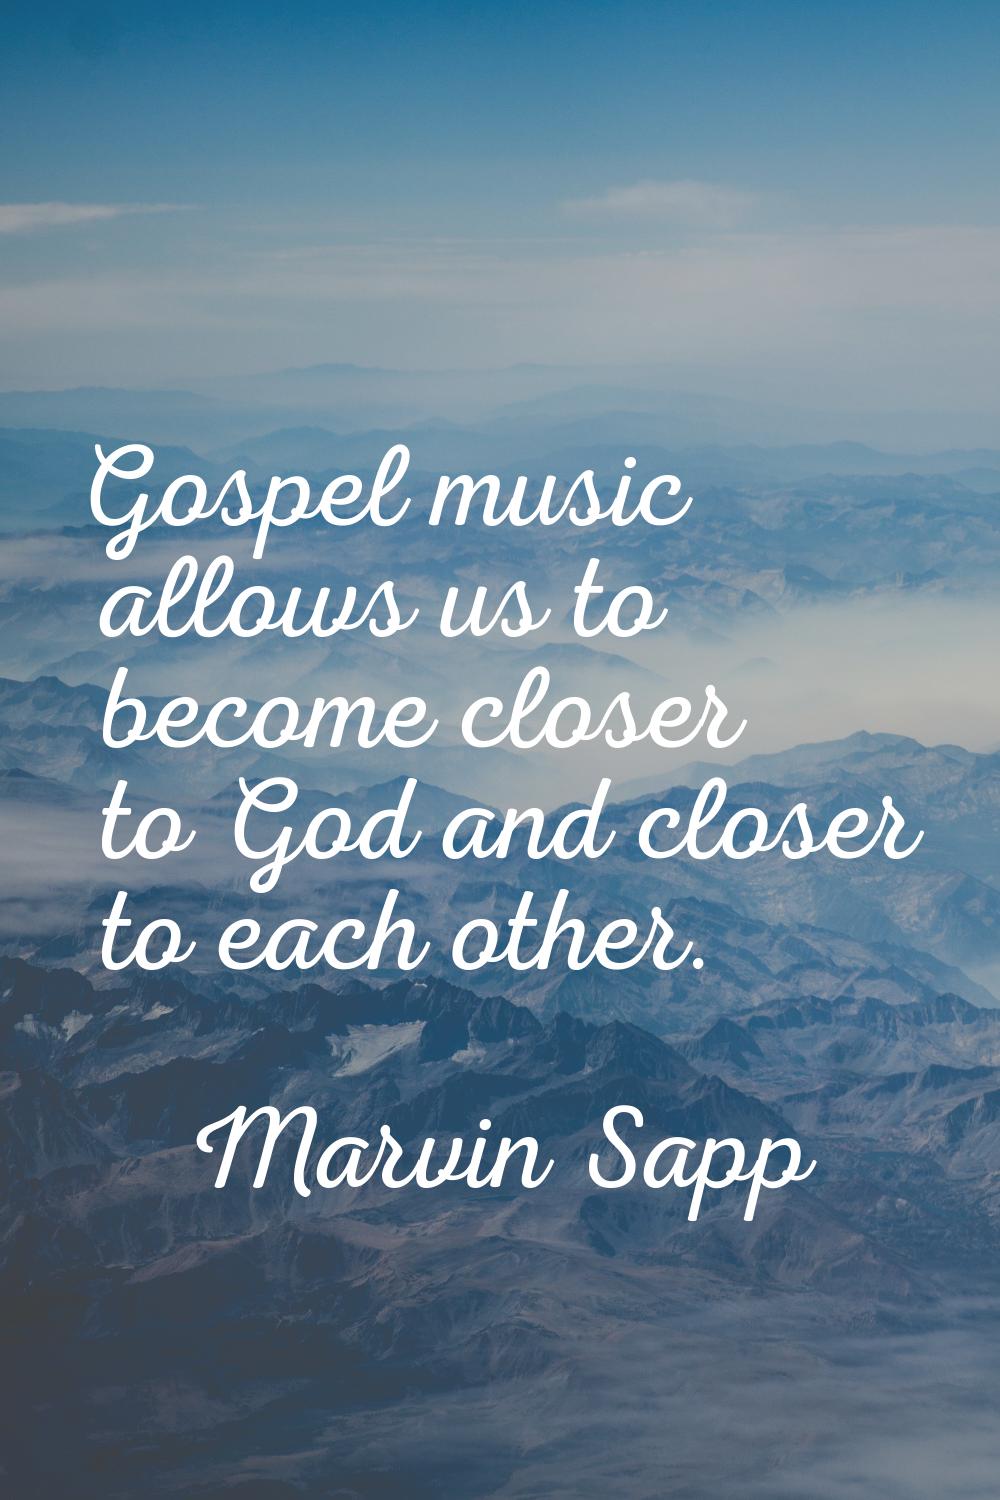 Gospel music allows us to become closer to God and closer to each other.